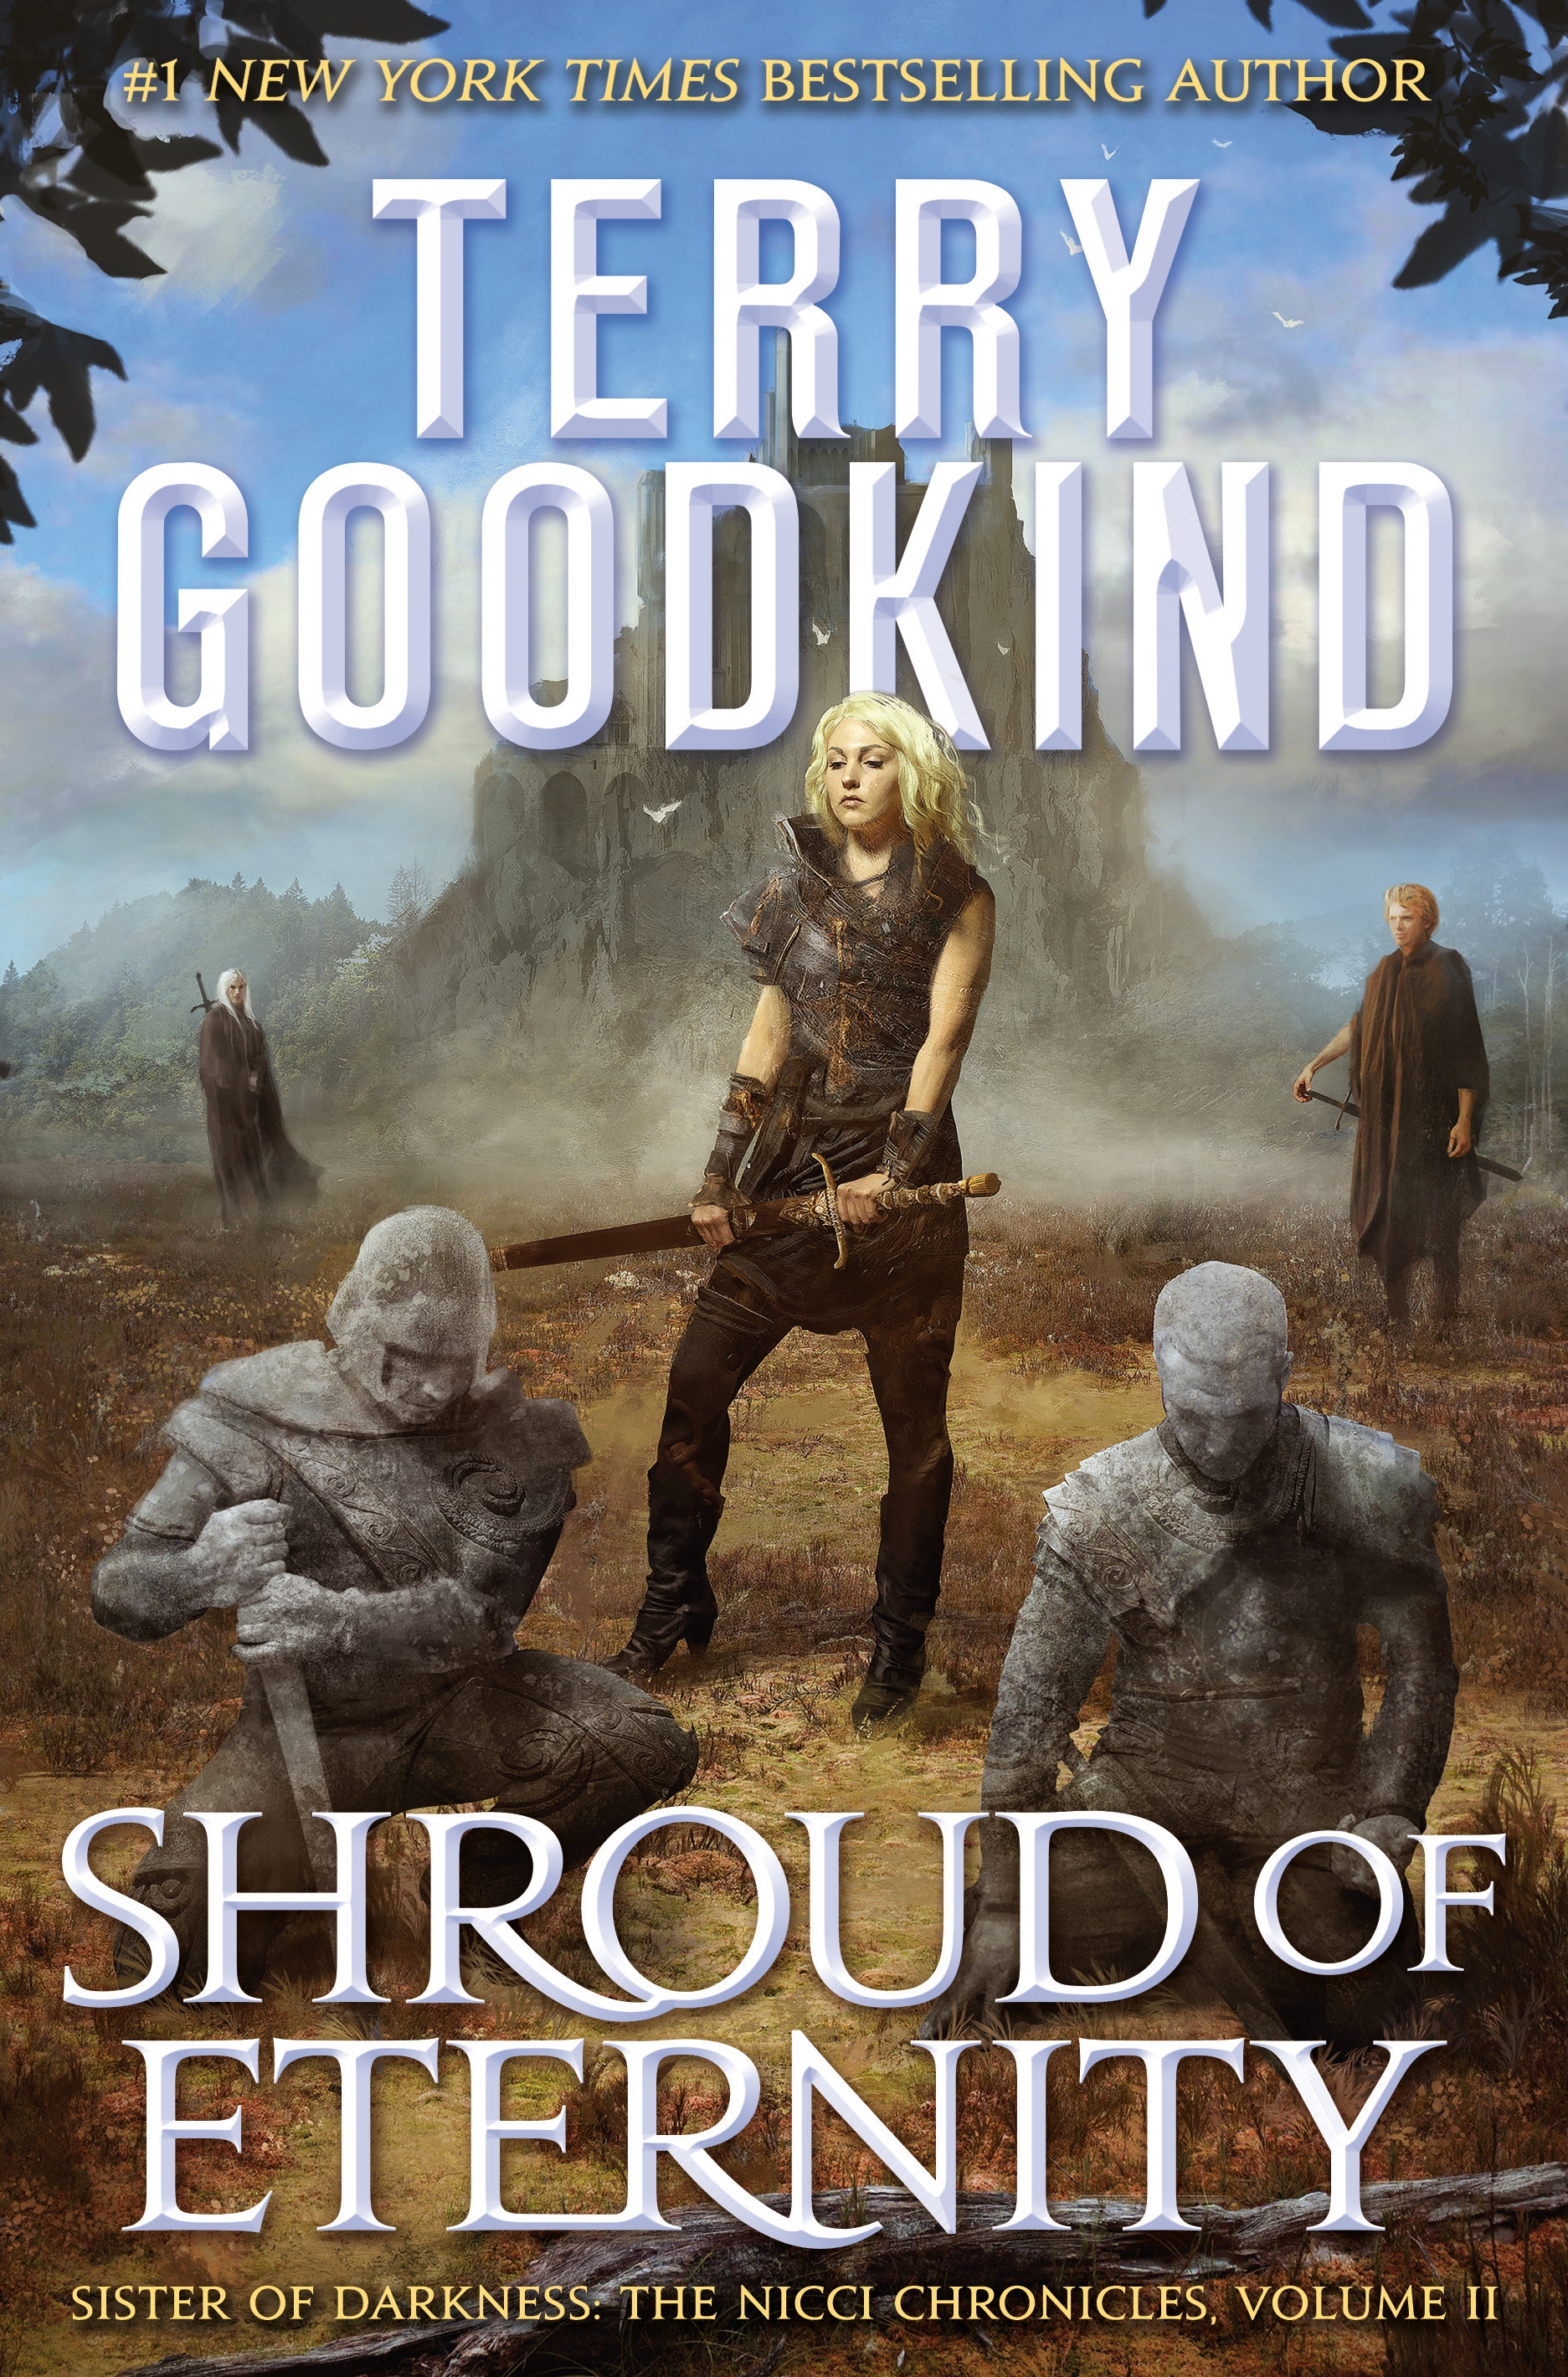 Shroud of Eternity : Sister of Darkness: The Nicci Chronicles, Volume II by Terry Goodkind